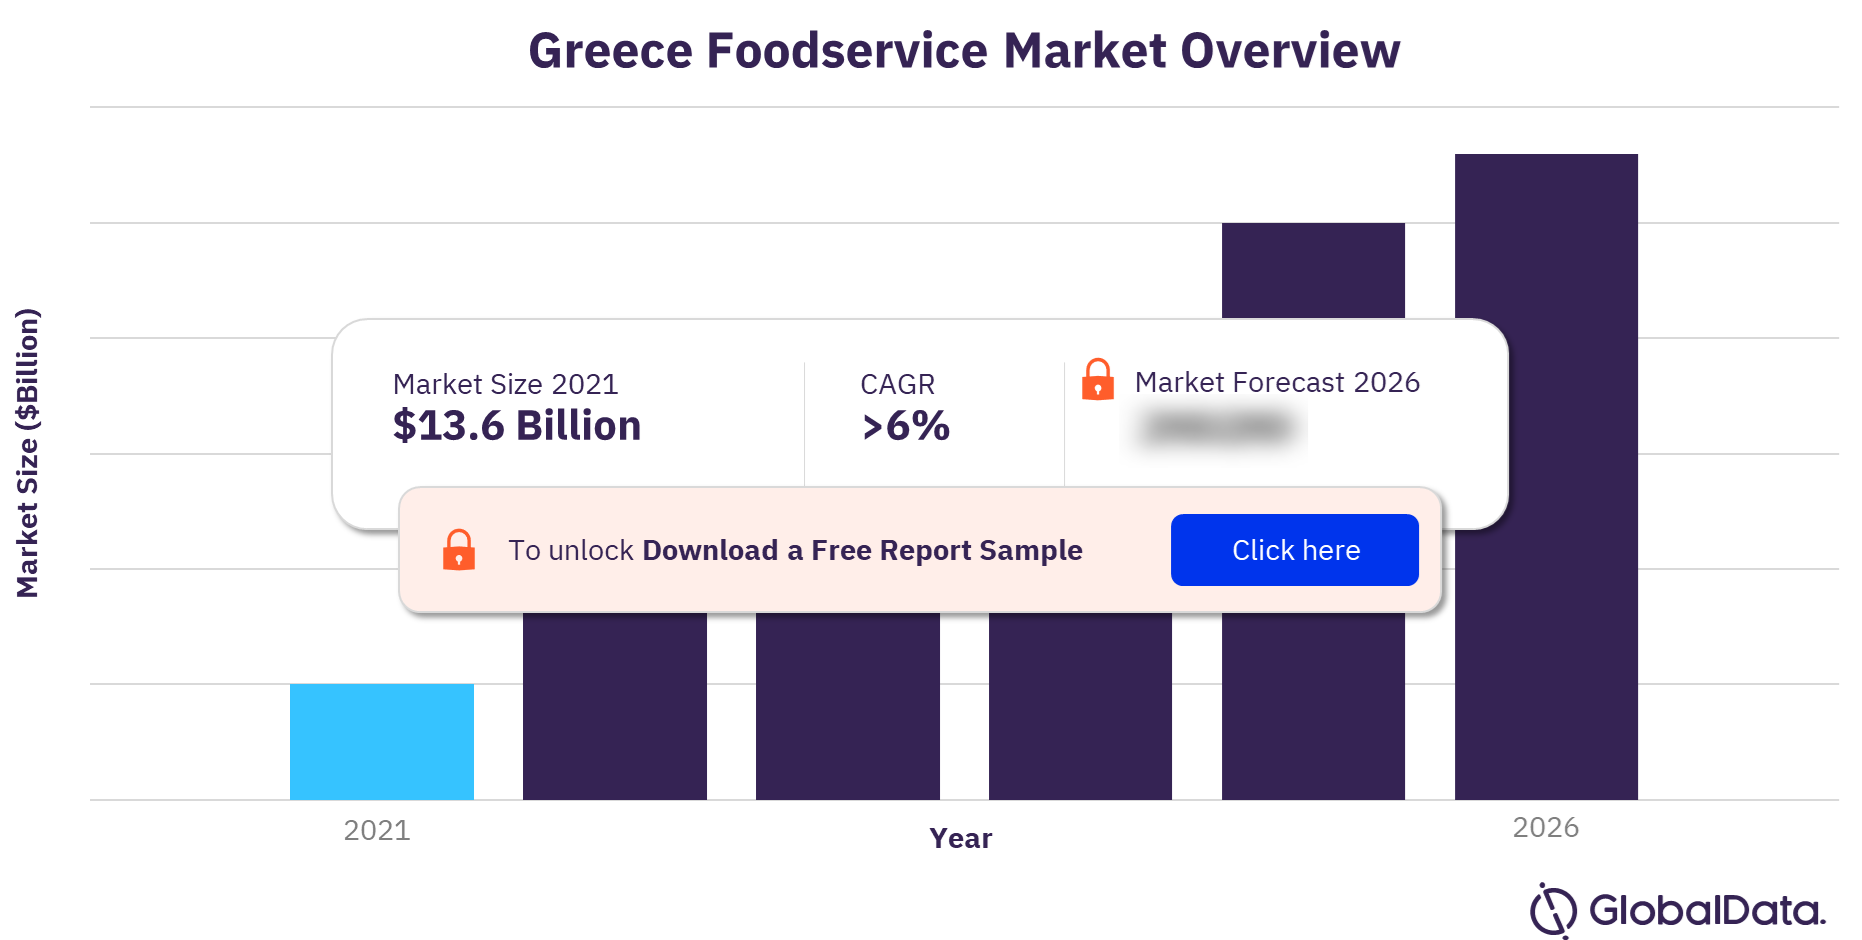 Greece foodservice market overview